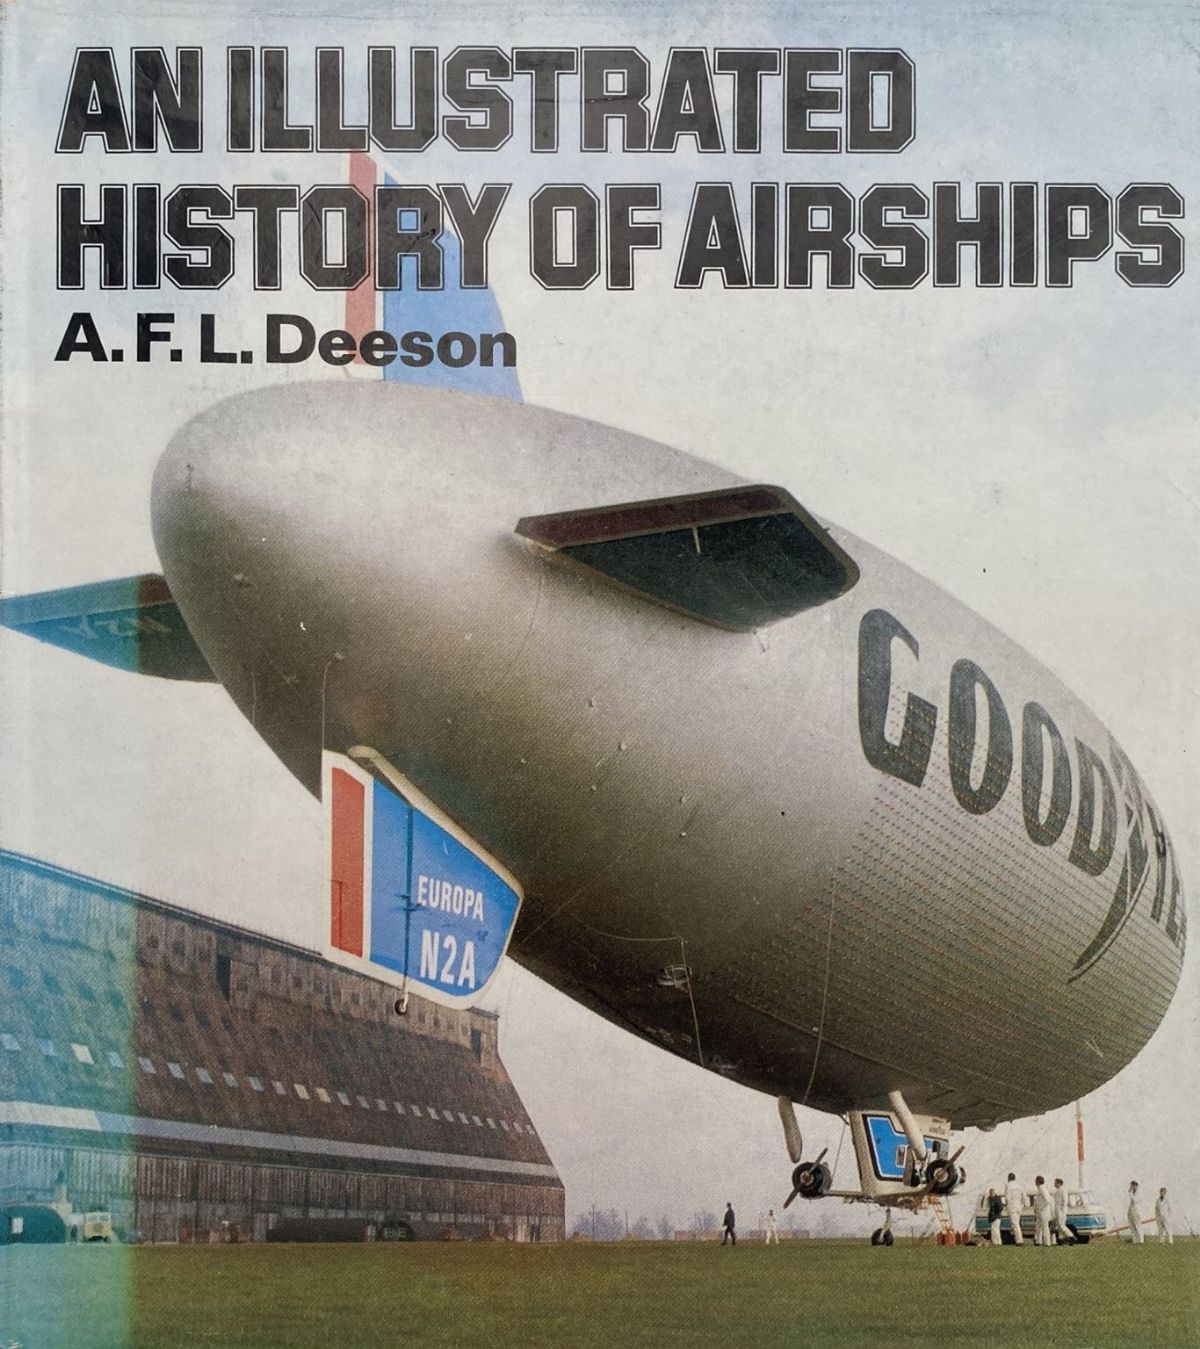 AN ILLUSTRATED HISTORY OF AIRSHIPS